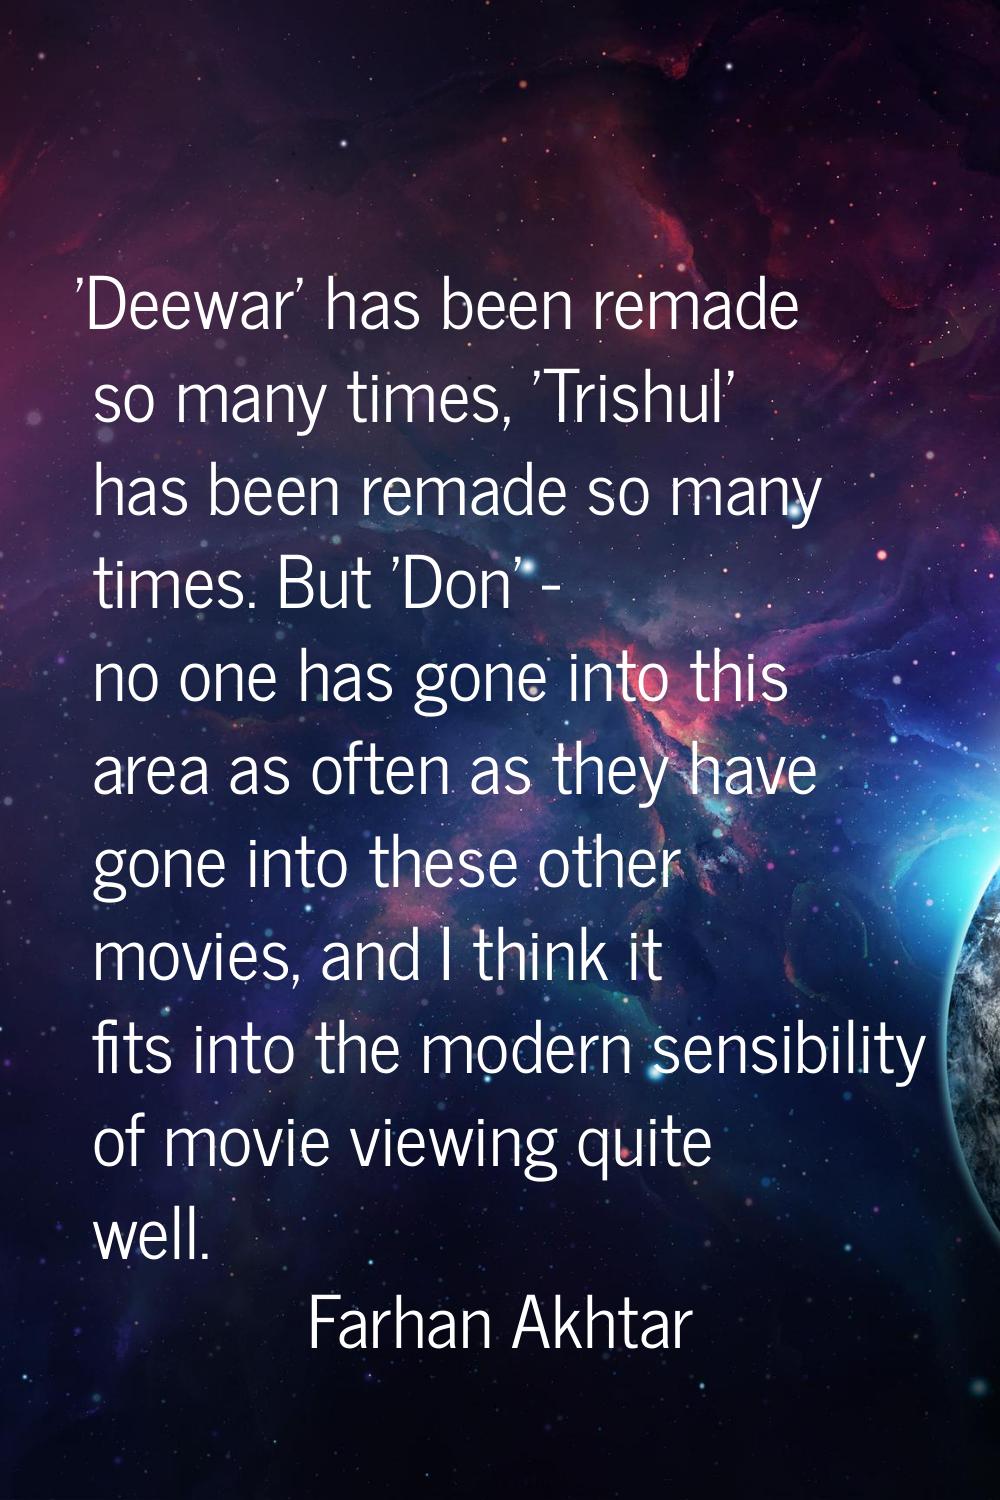 'Deewar' has been remade so many times, 'Trishul' has been remade so many times. But 'Don' - no one